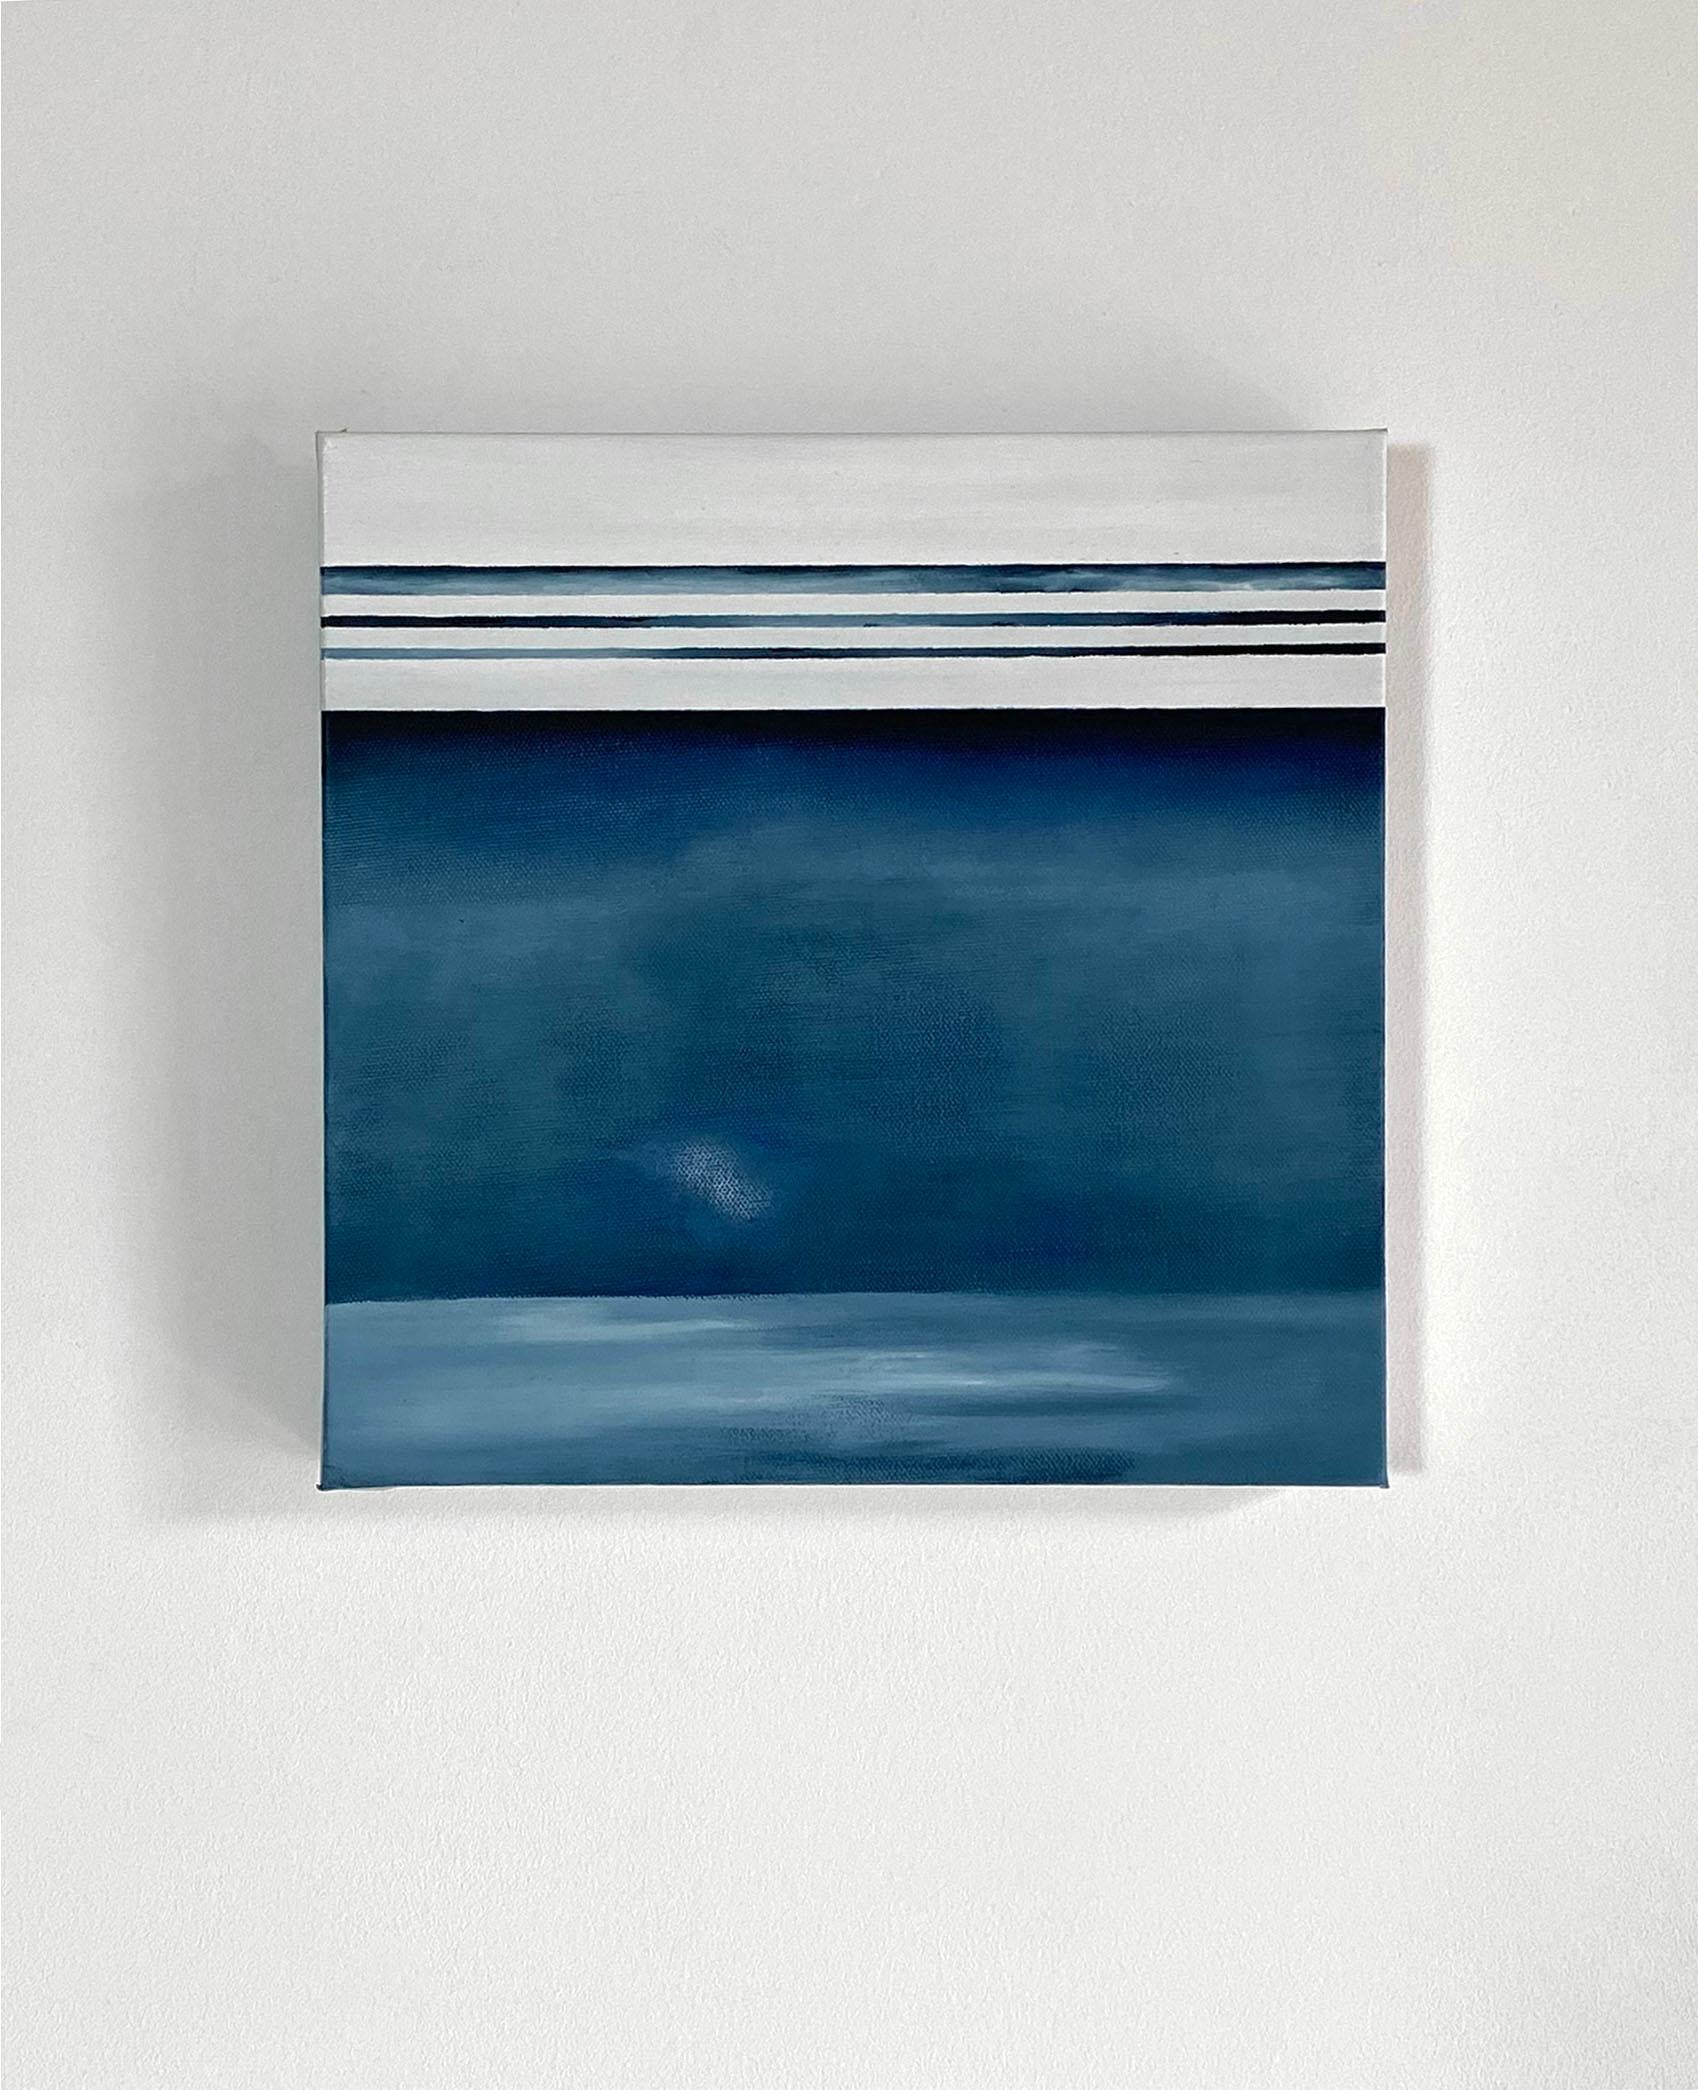 This small abstract painting by Tony Iadicicco is made with oil paint on gallery wrapped canvas. Three parallel dark blue-grey horizontal lines are located at the top of the composition, with white on either side and between them. A larger block of